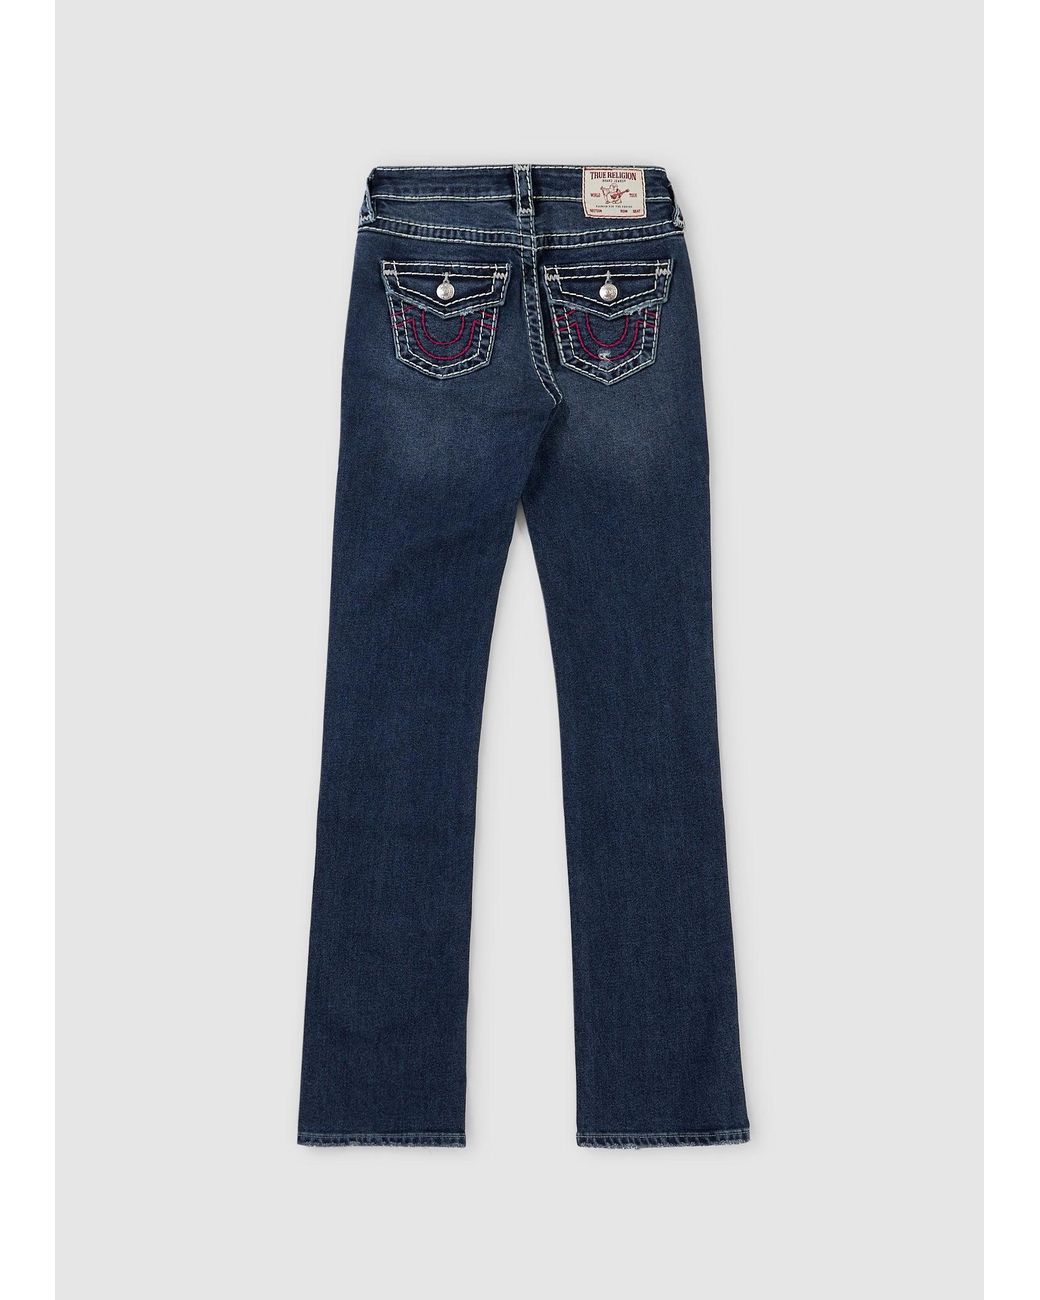 True Religion Billie Super T Jeans With Pocket Flap in Blue | Lyst